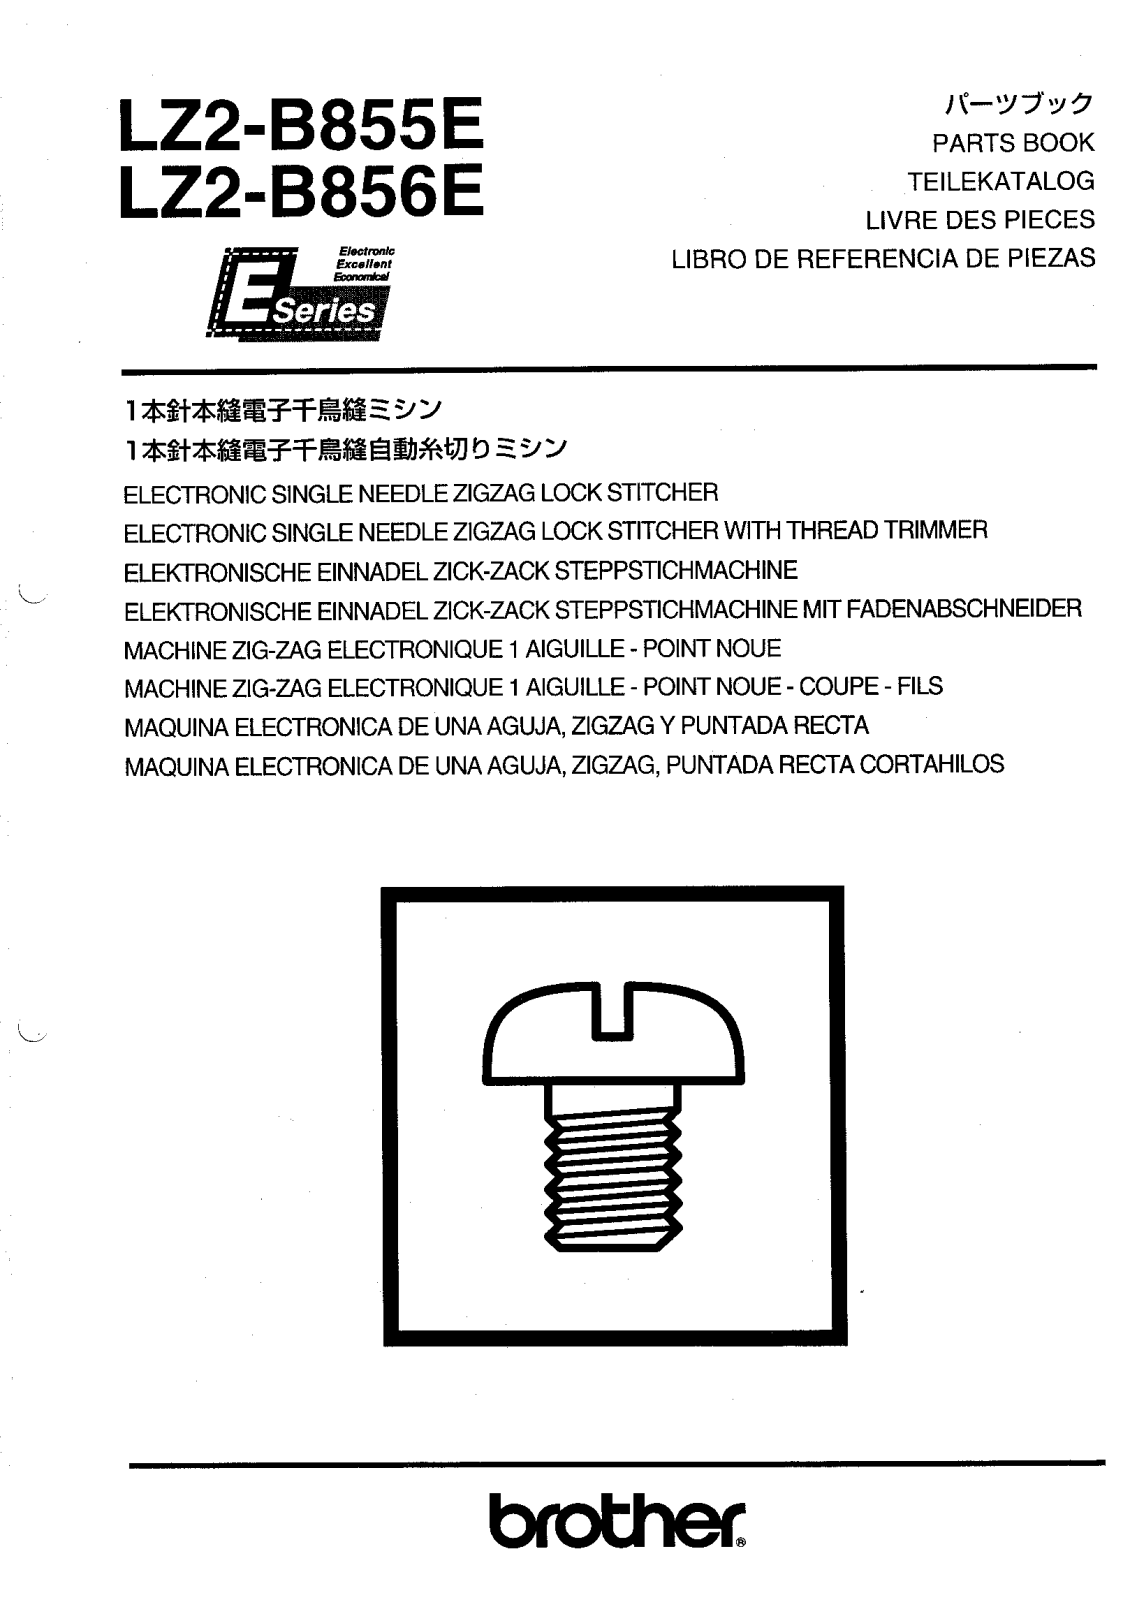 BROTHER LZ2-B855E Parts List